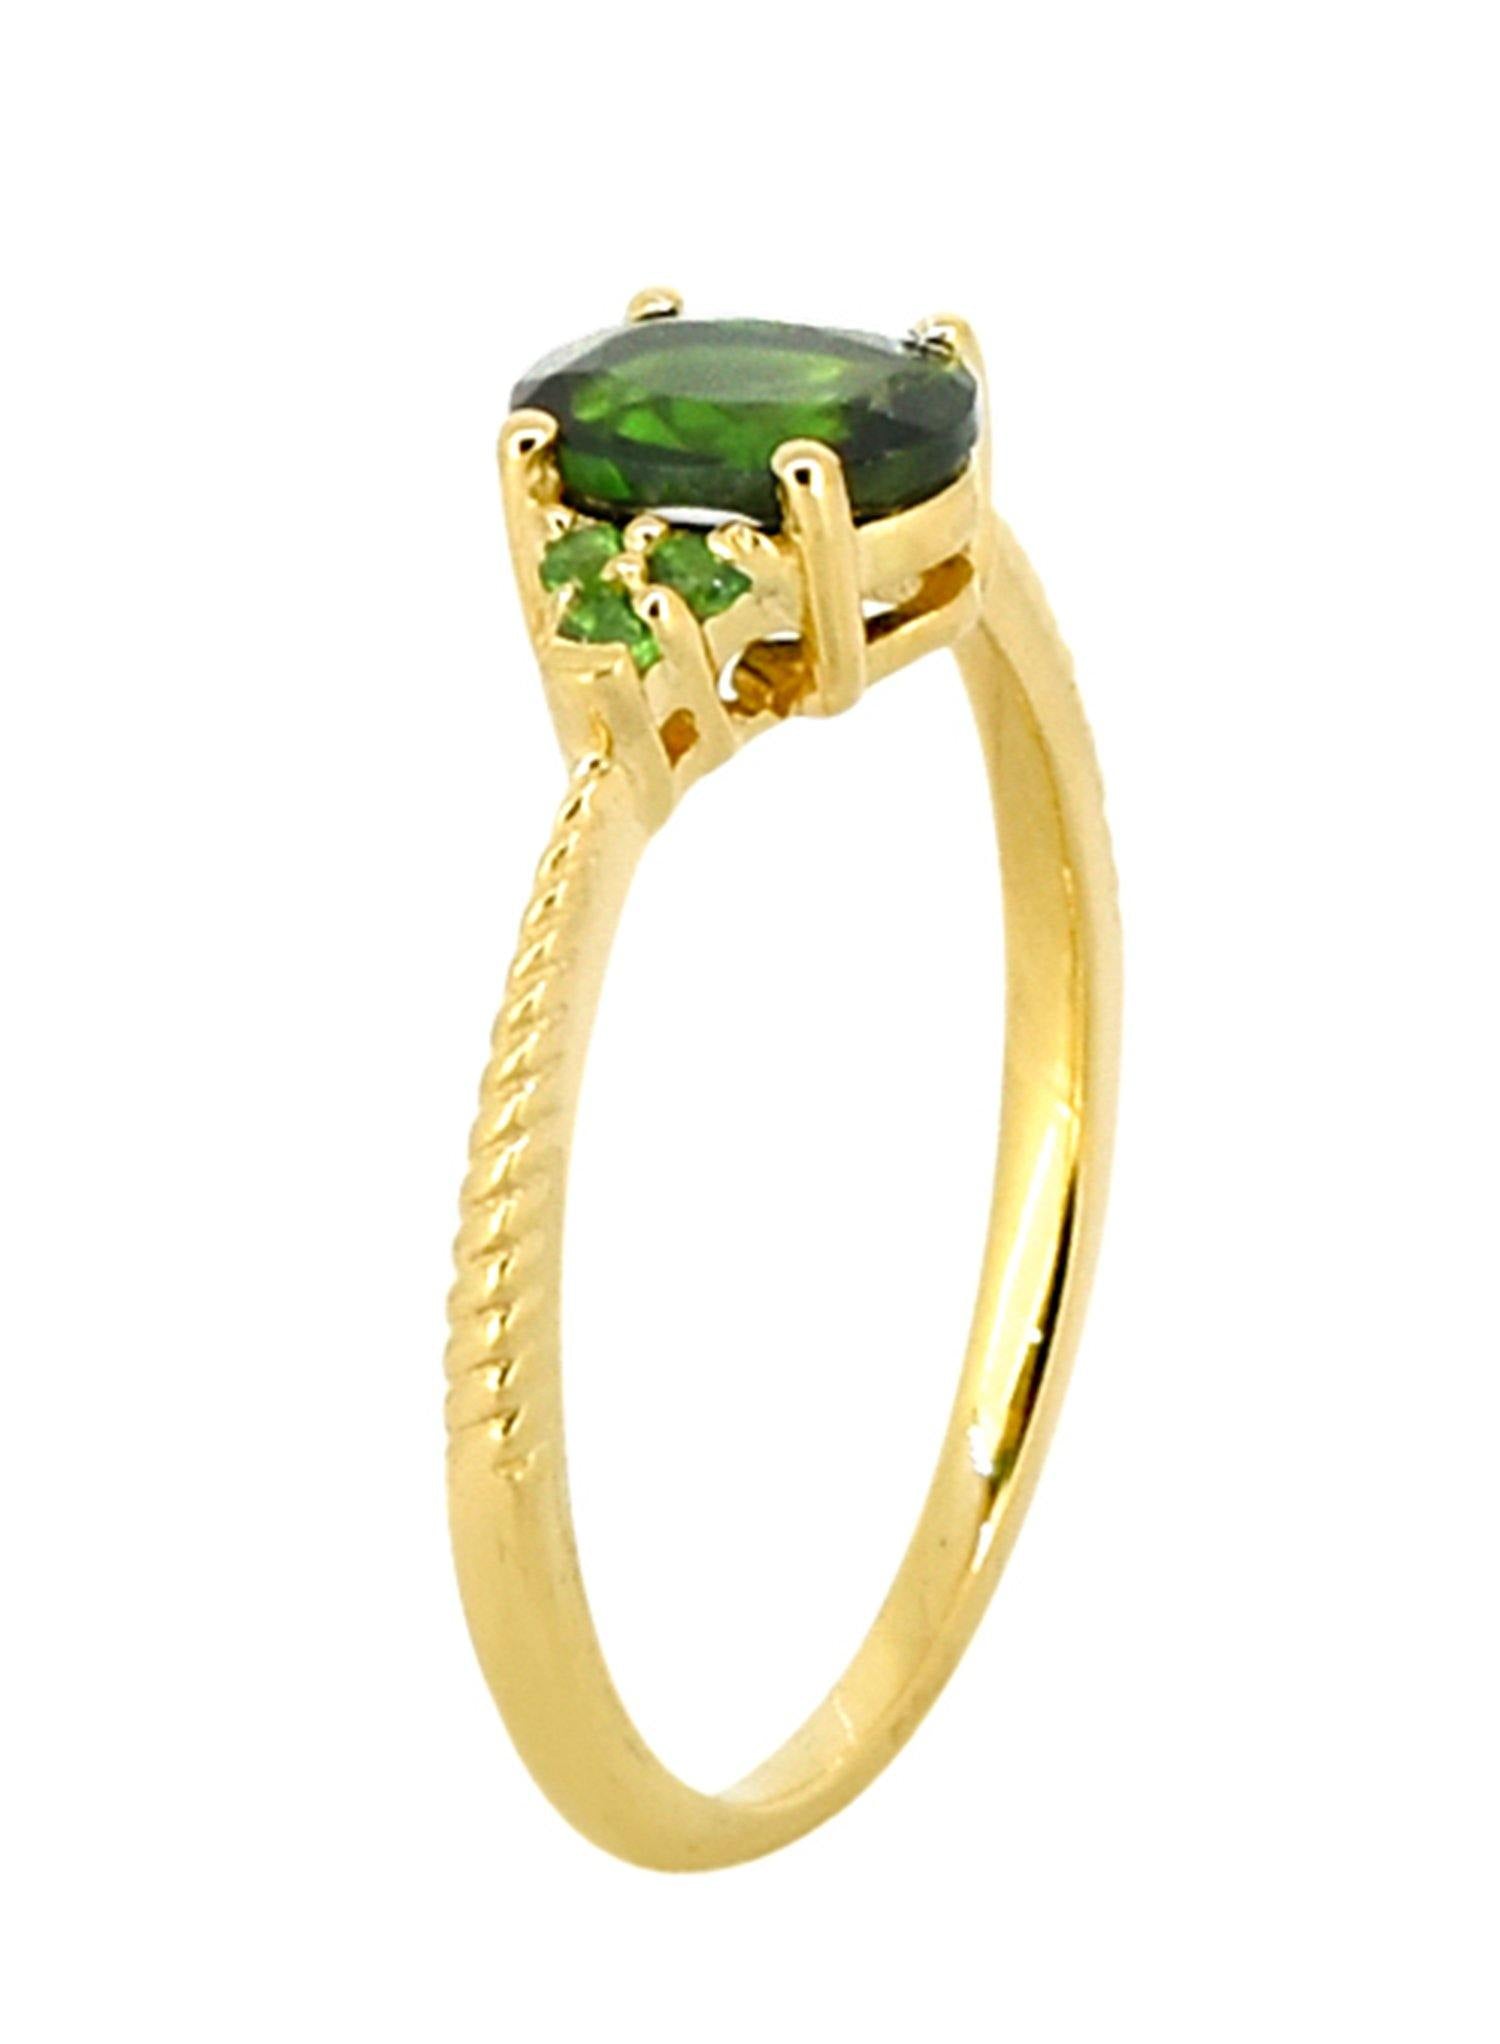 Chrome Diopside Solid 925 Sterling Silver Gold Plated Promise Ring Genuine Gemstone Jewelry - YoTreasure